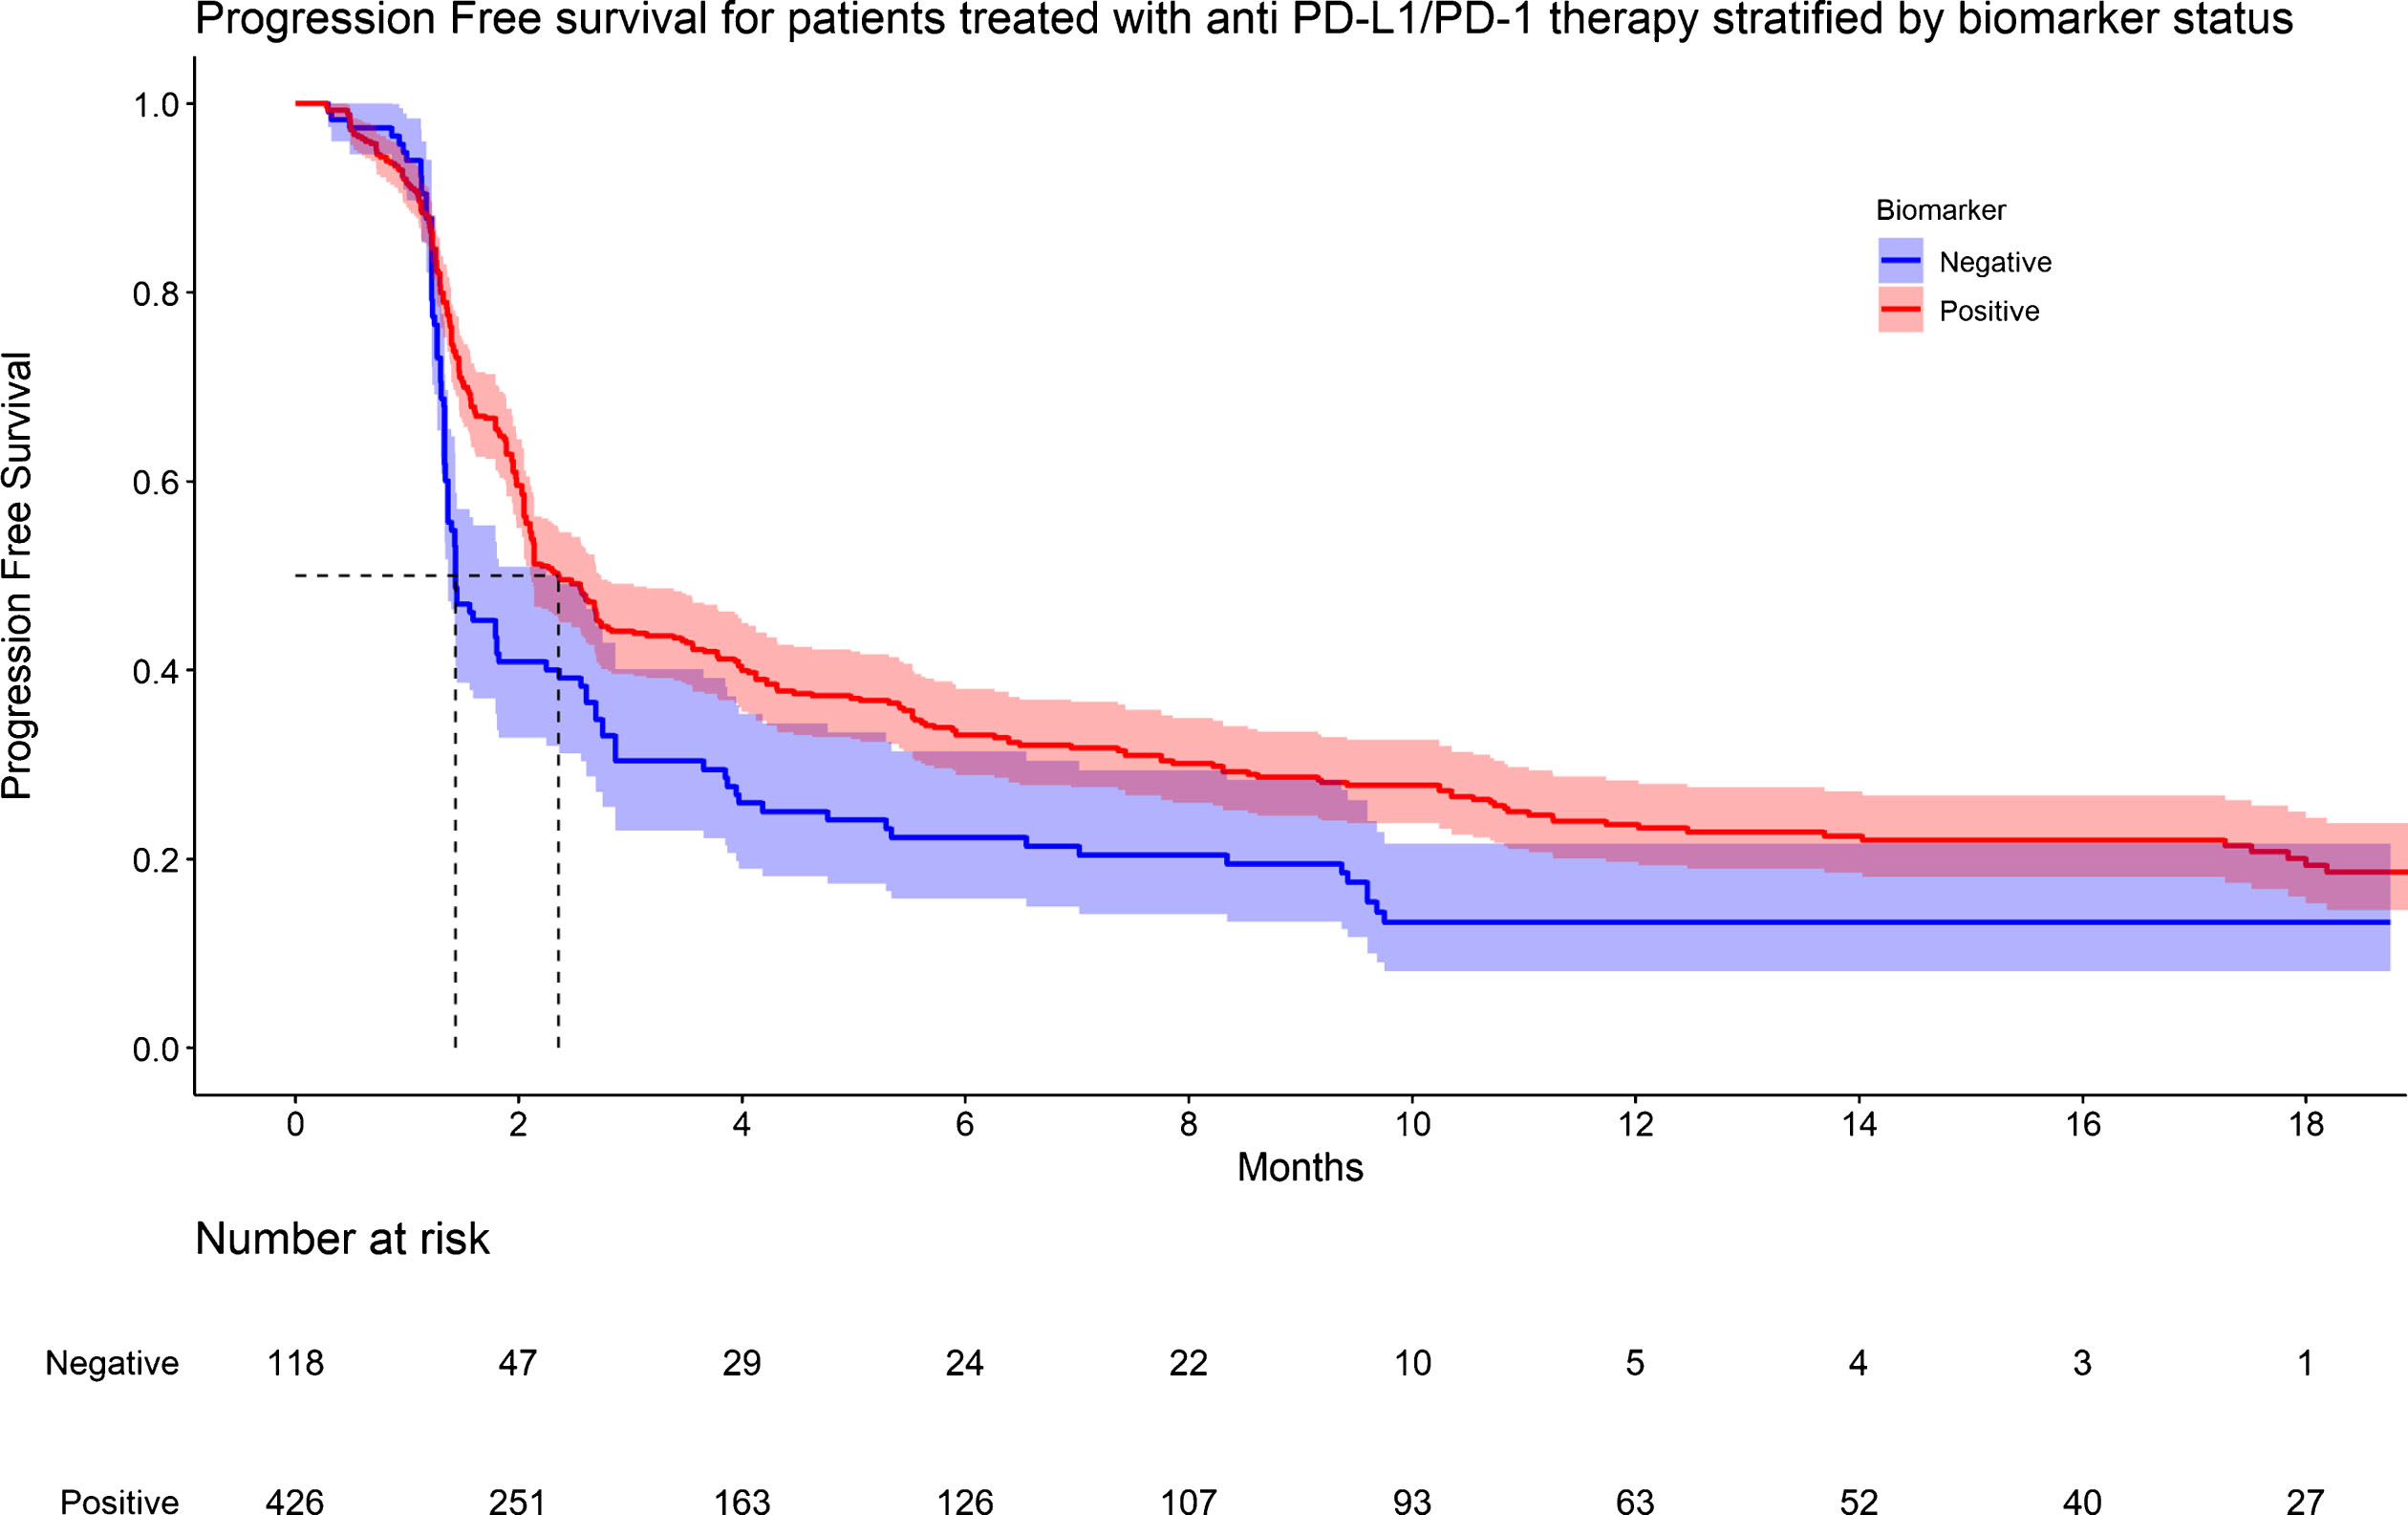 KM graph of progression survival for patients treated with anti PD-L1/PD-1 therapy stratified by biomarker status.